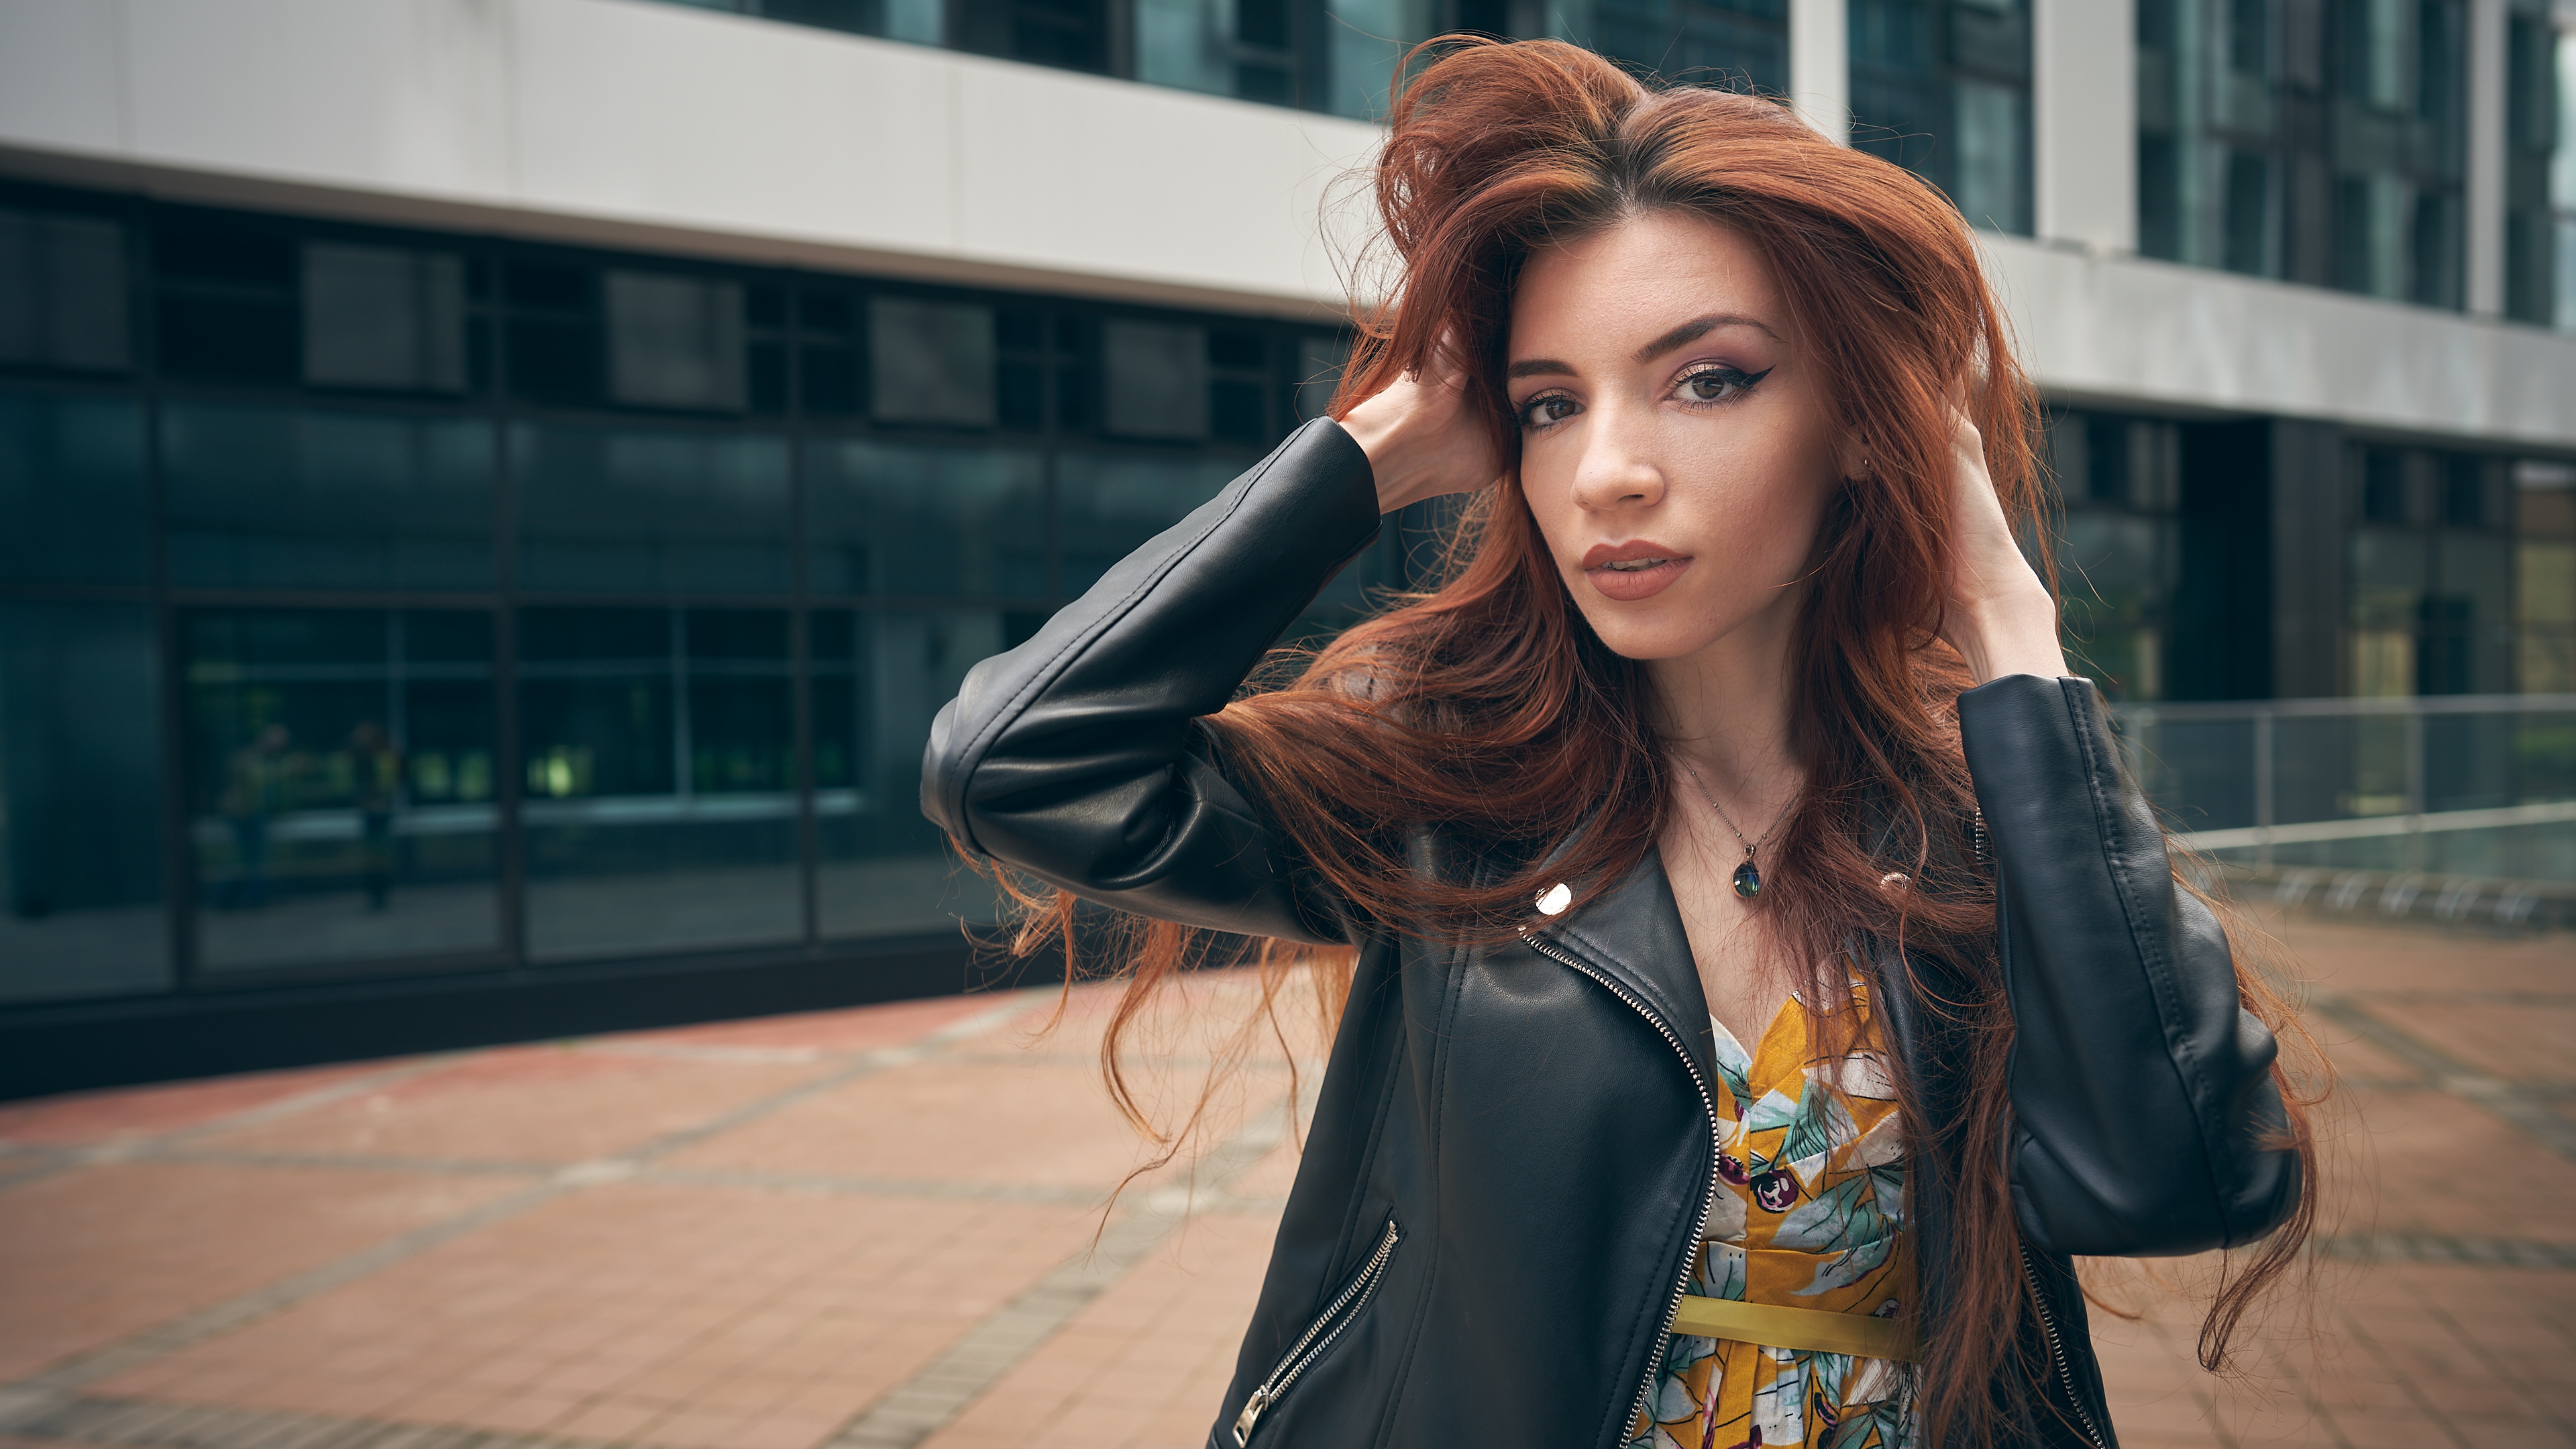 Face Redhead Leather Jacket 3840x2160